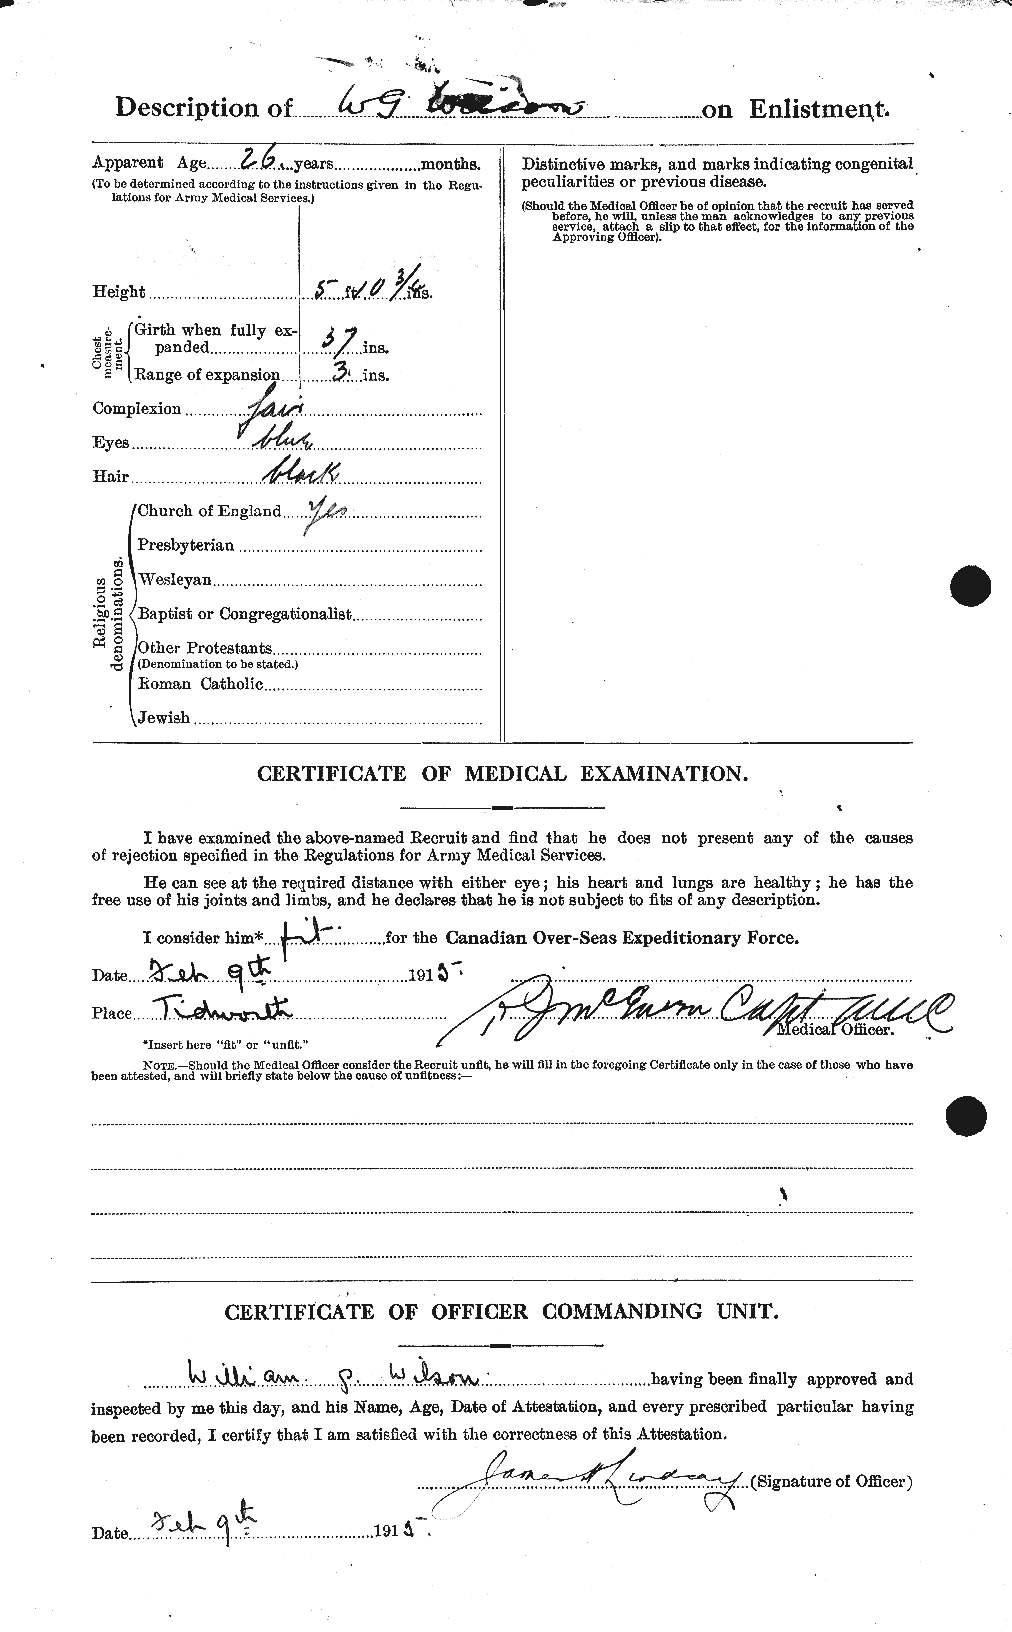 Personnel Records of the First World War - CEF 682003b